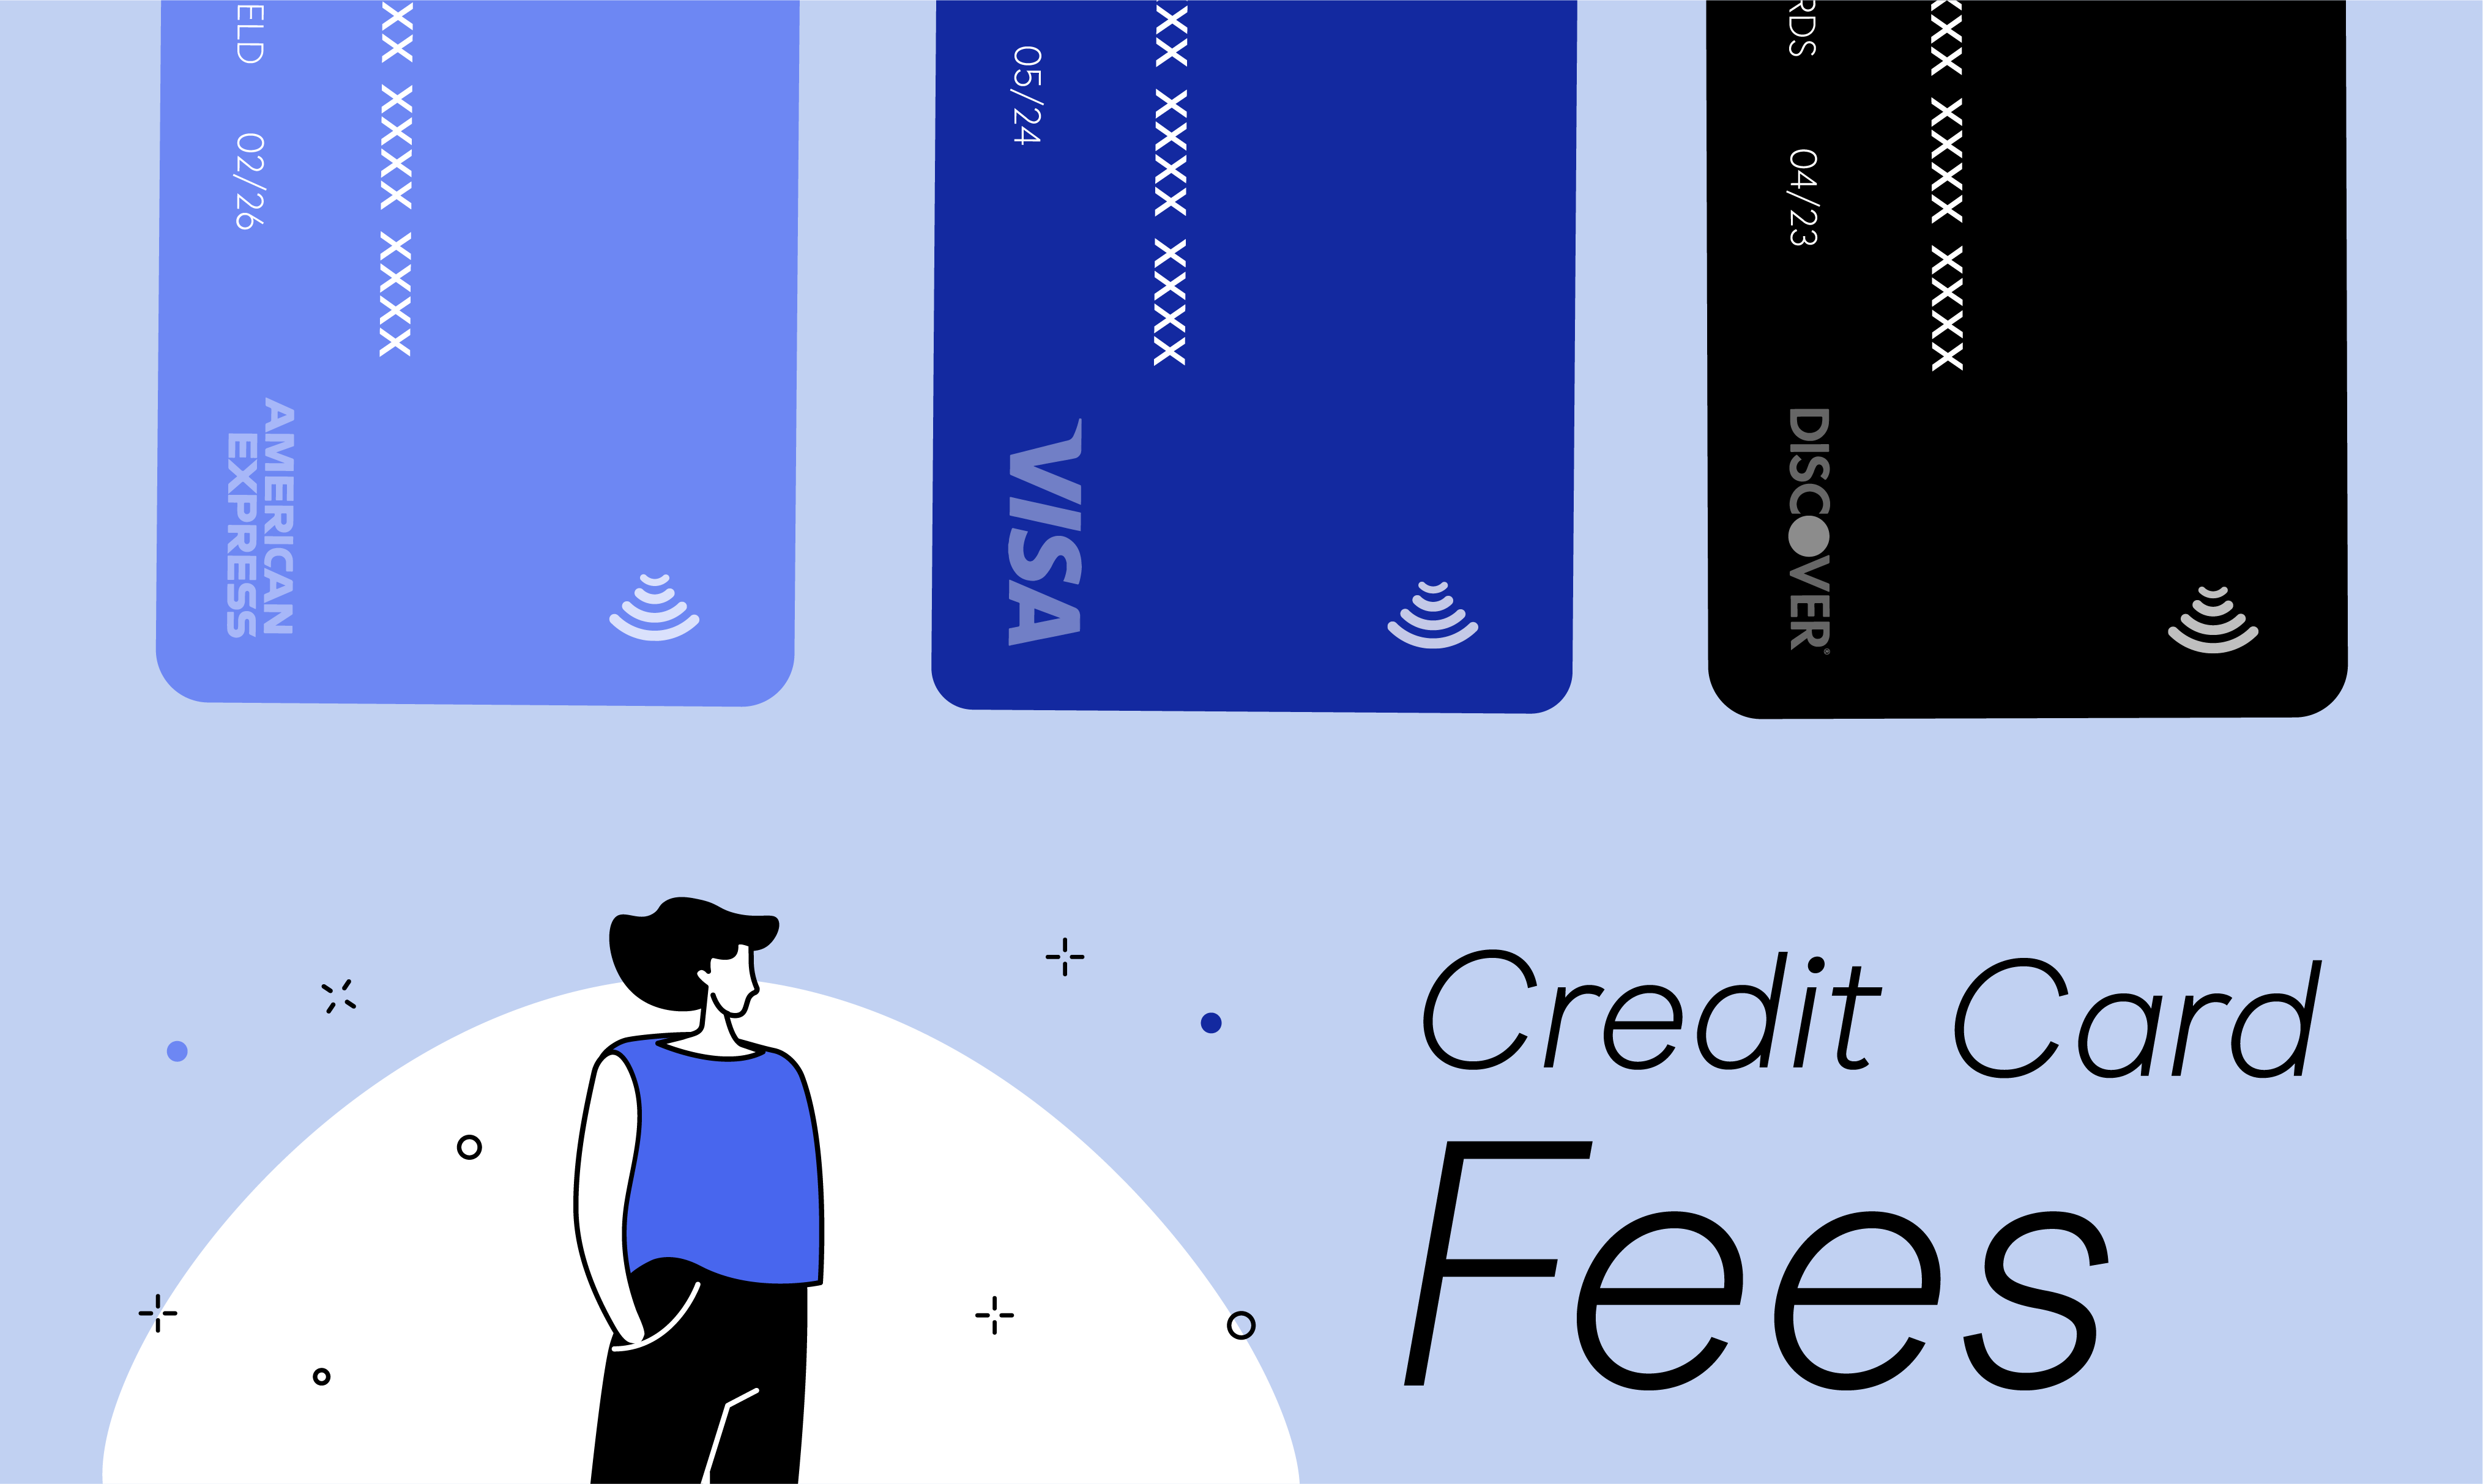 What Are the Average Credit Card Processing Fees That Merchants Pay?